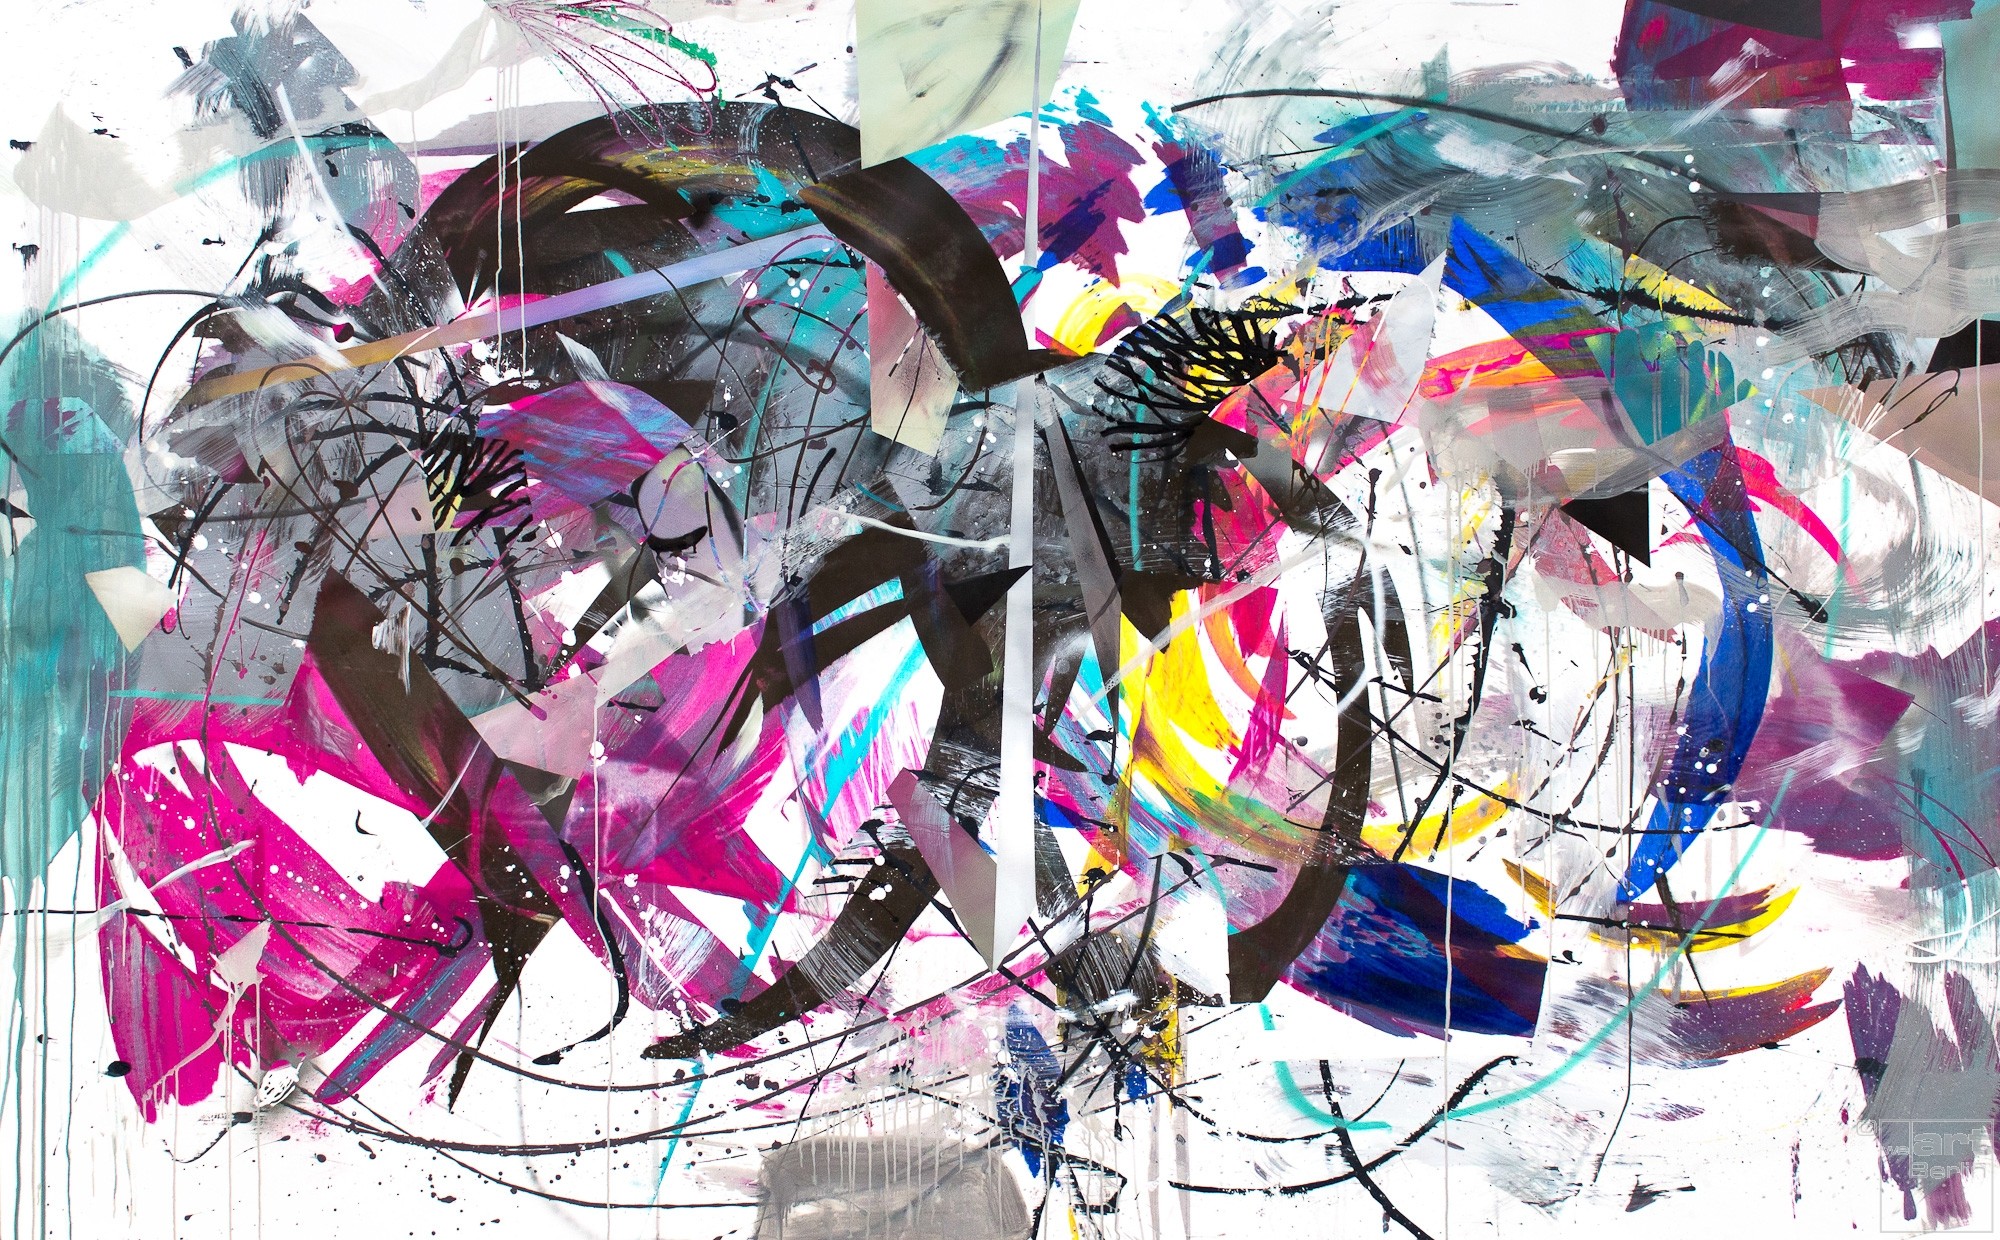 untitled 24, painting by Malwin Faber, oil, acrylic and spray paint on canvas